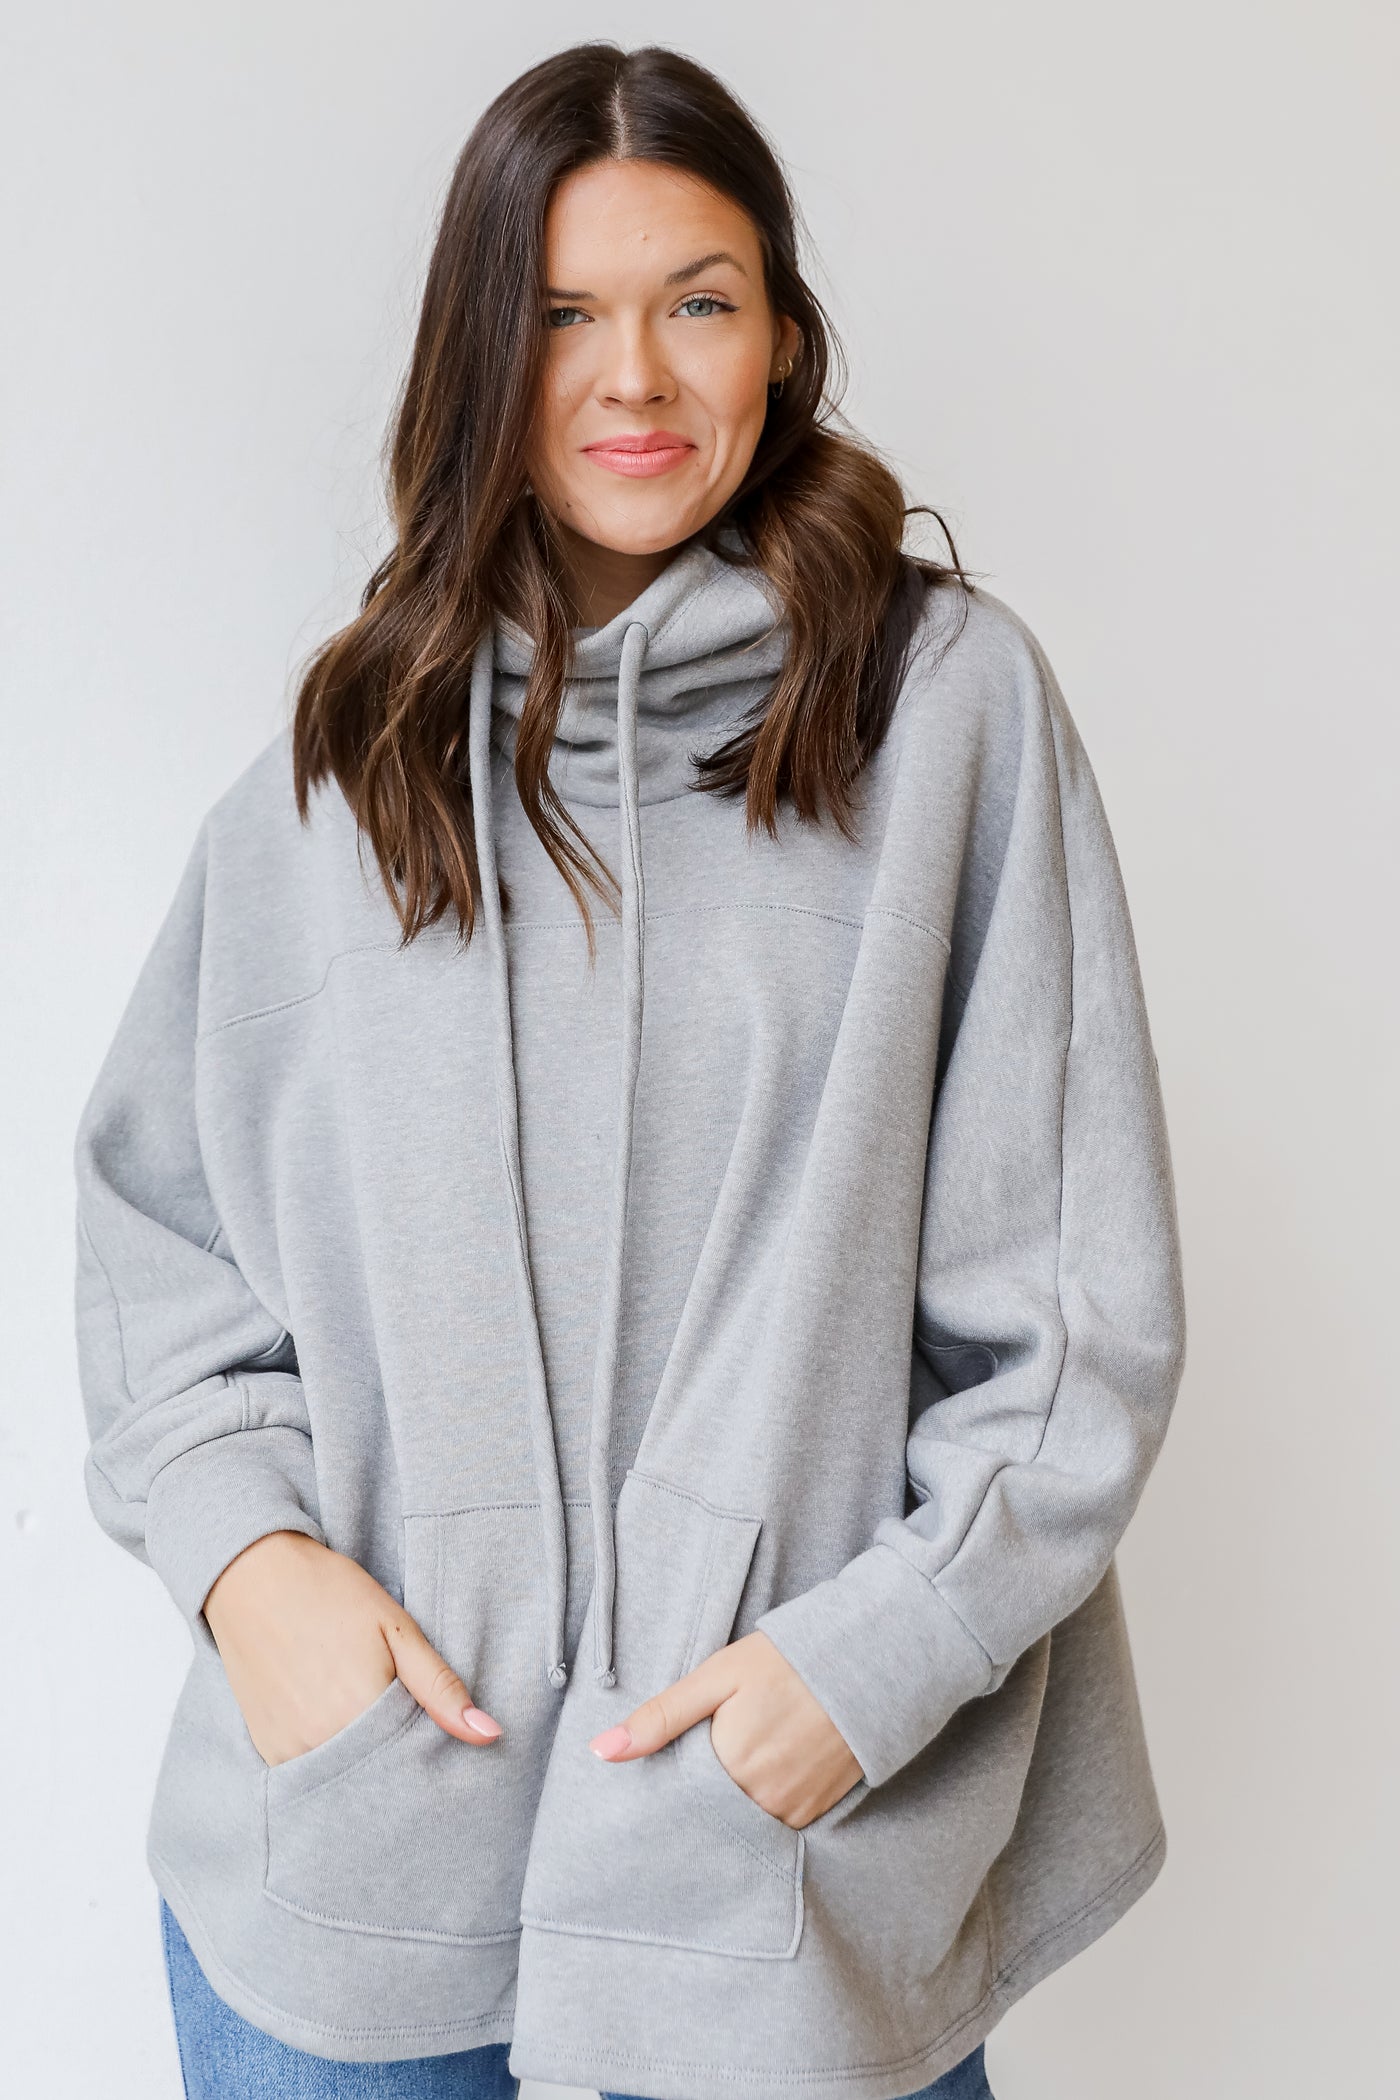 Cowl Neck Pullover in heather grey